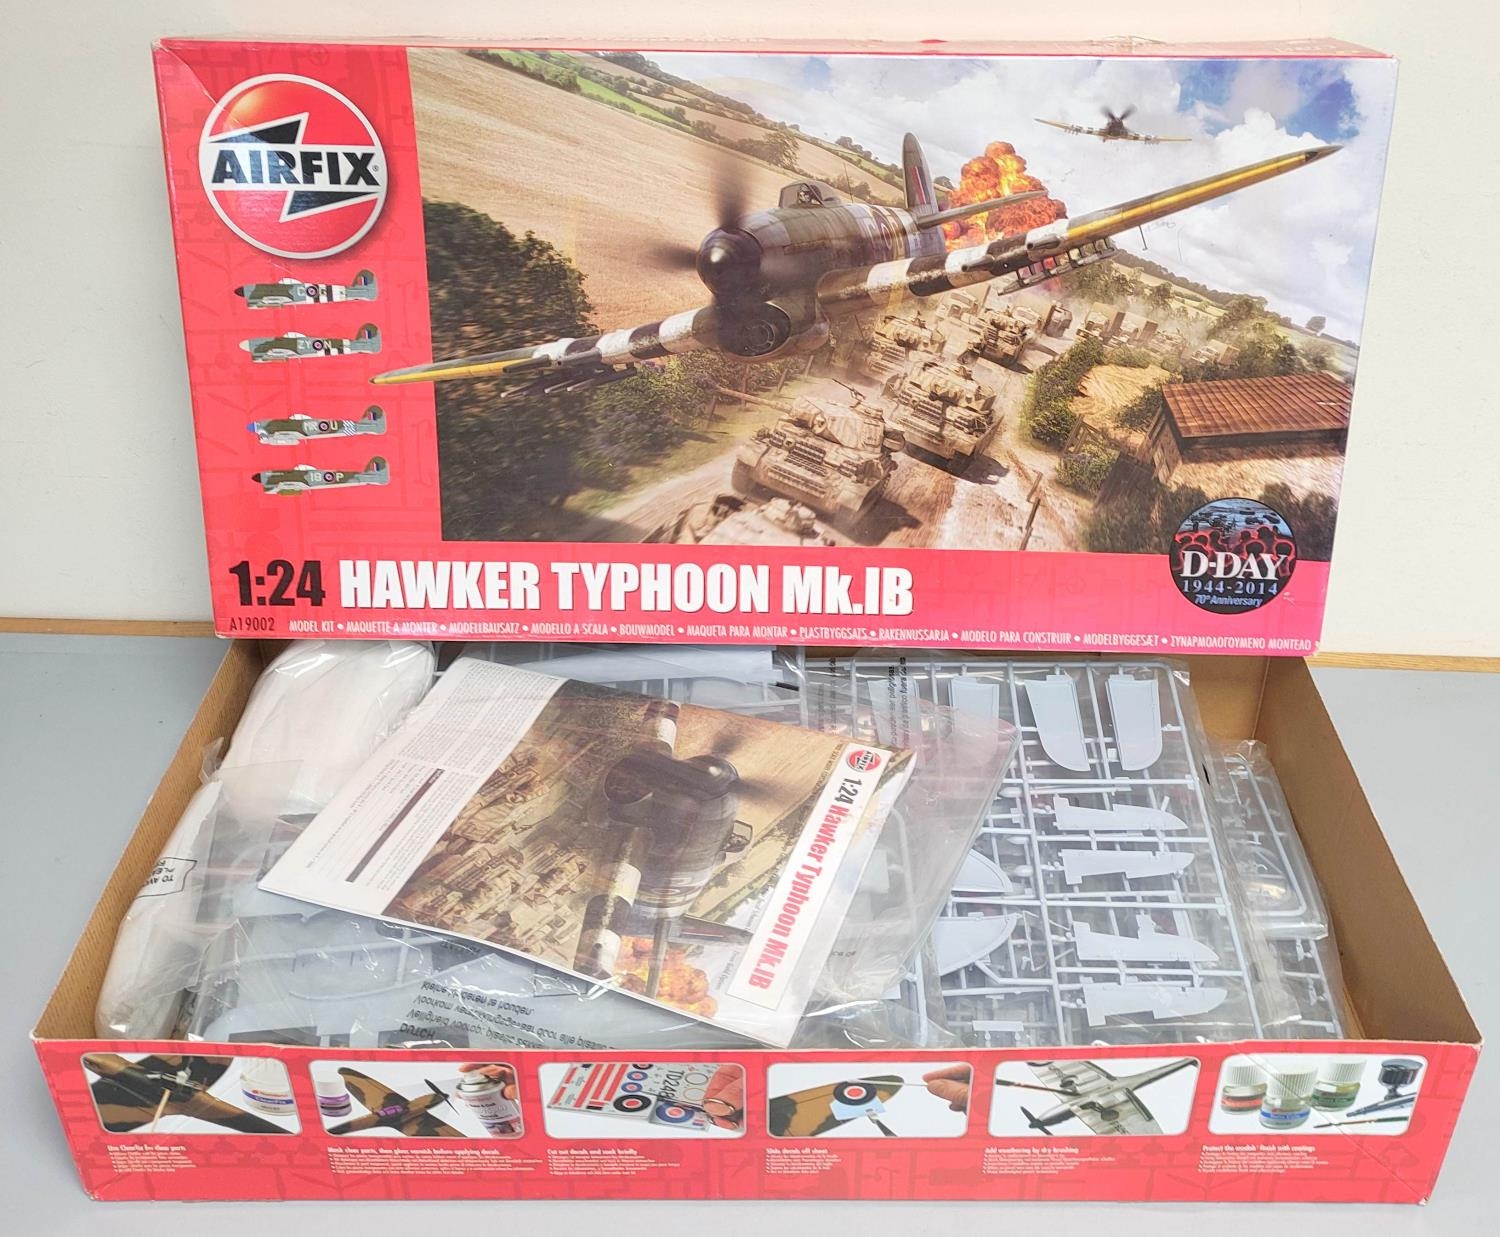 Airfix. Boxed 1:24 scale Hawker Typhoon Mk IB D-Day Anniversary 1944-2014 model. Kit no. A19002.